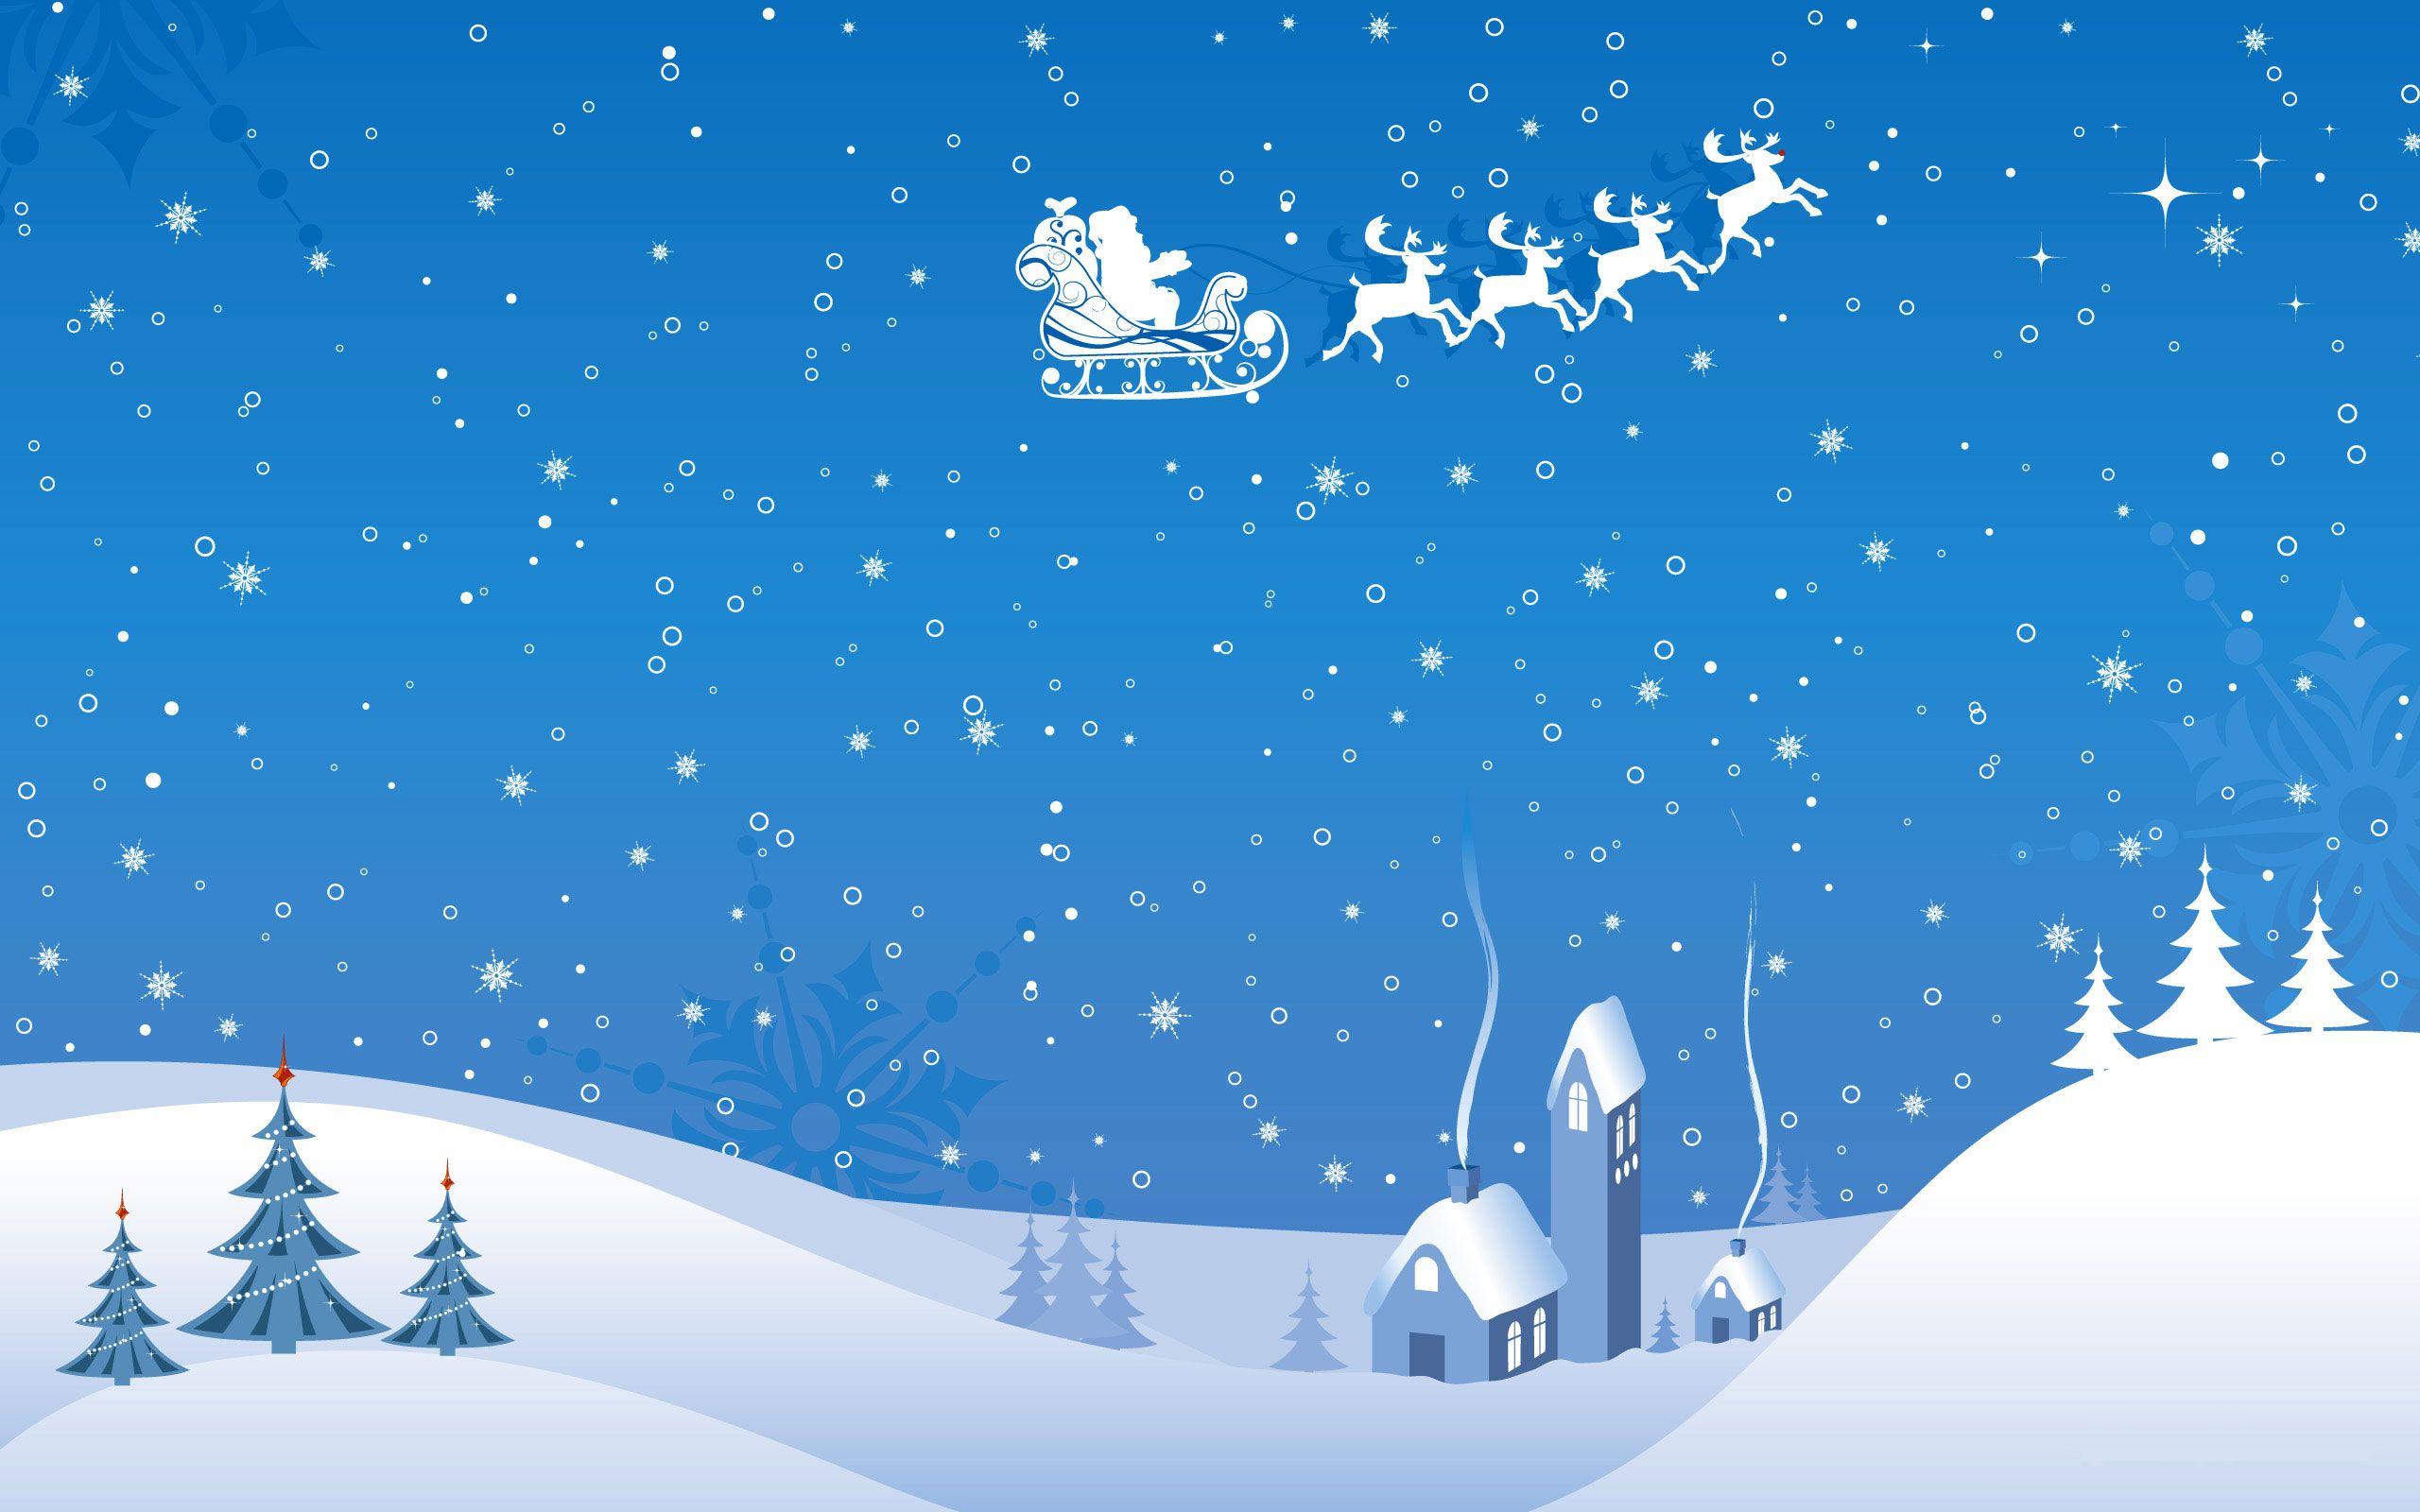 Merry Christmas 2014 hd wallpapers